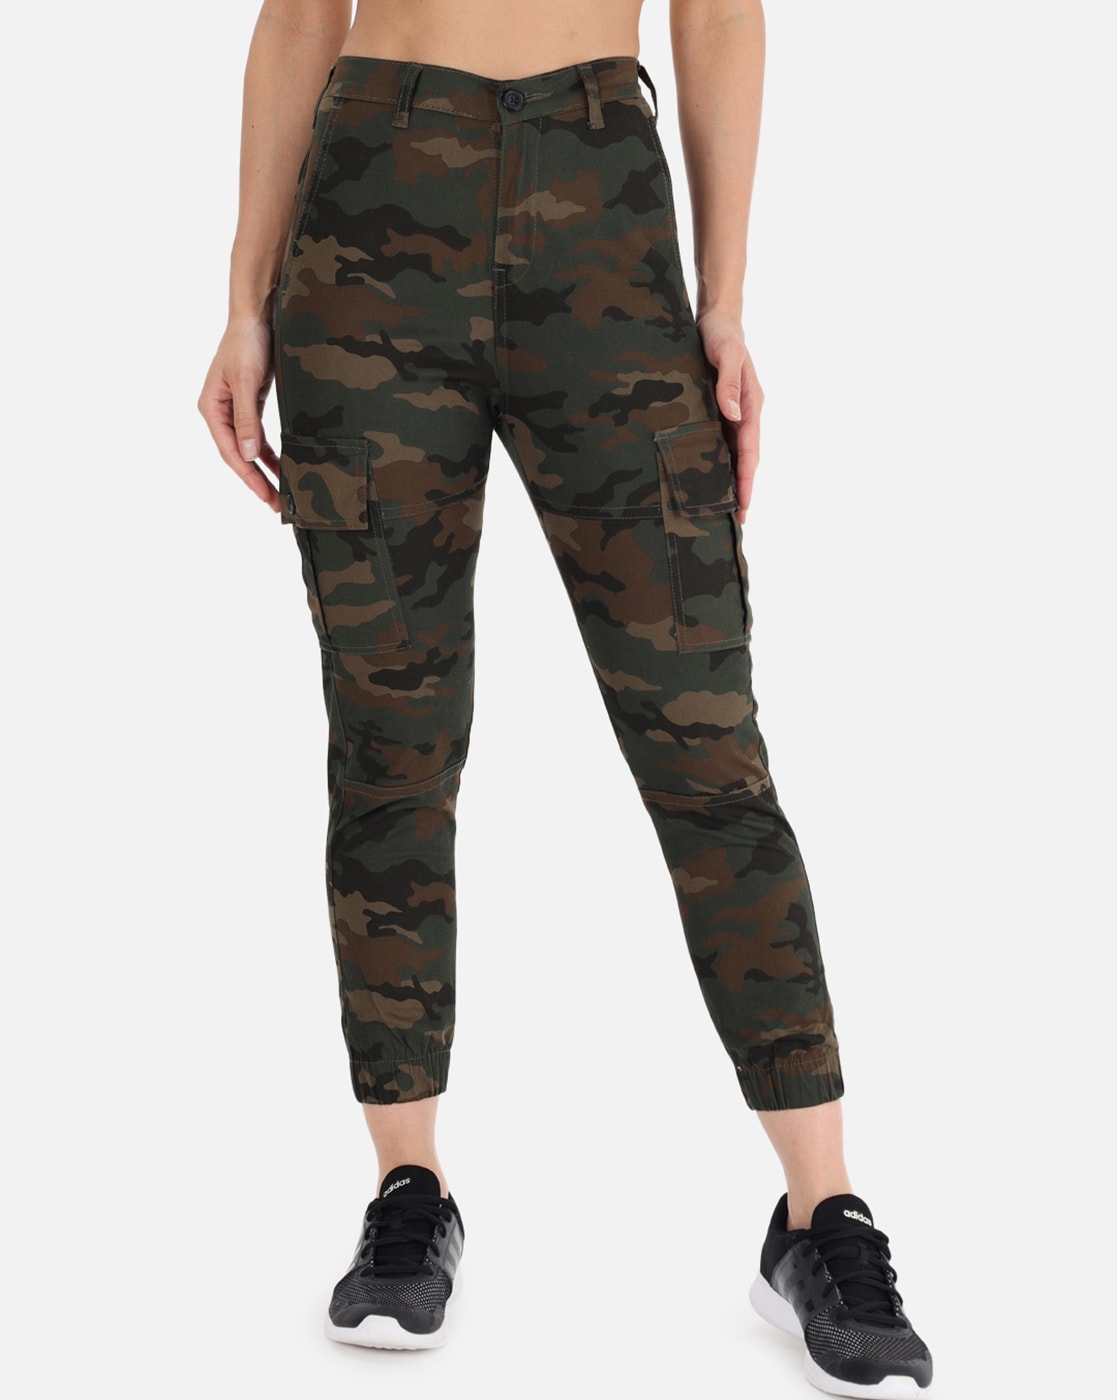 Camouflage Women Yellow Green Army Cargo Pant Slim Fit